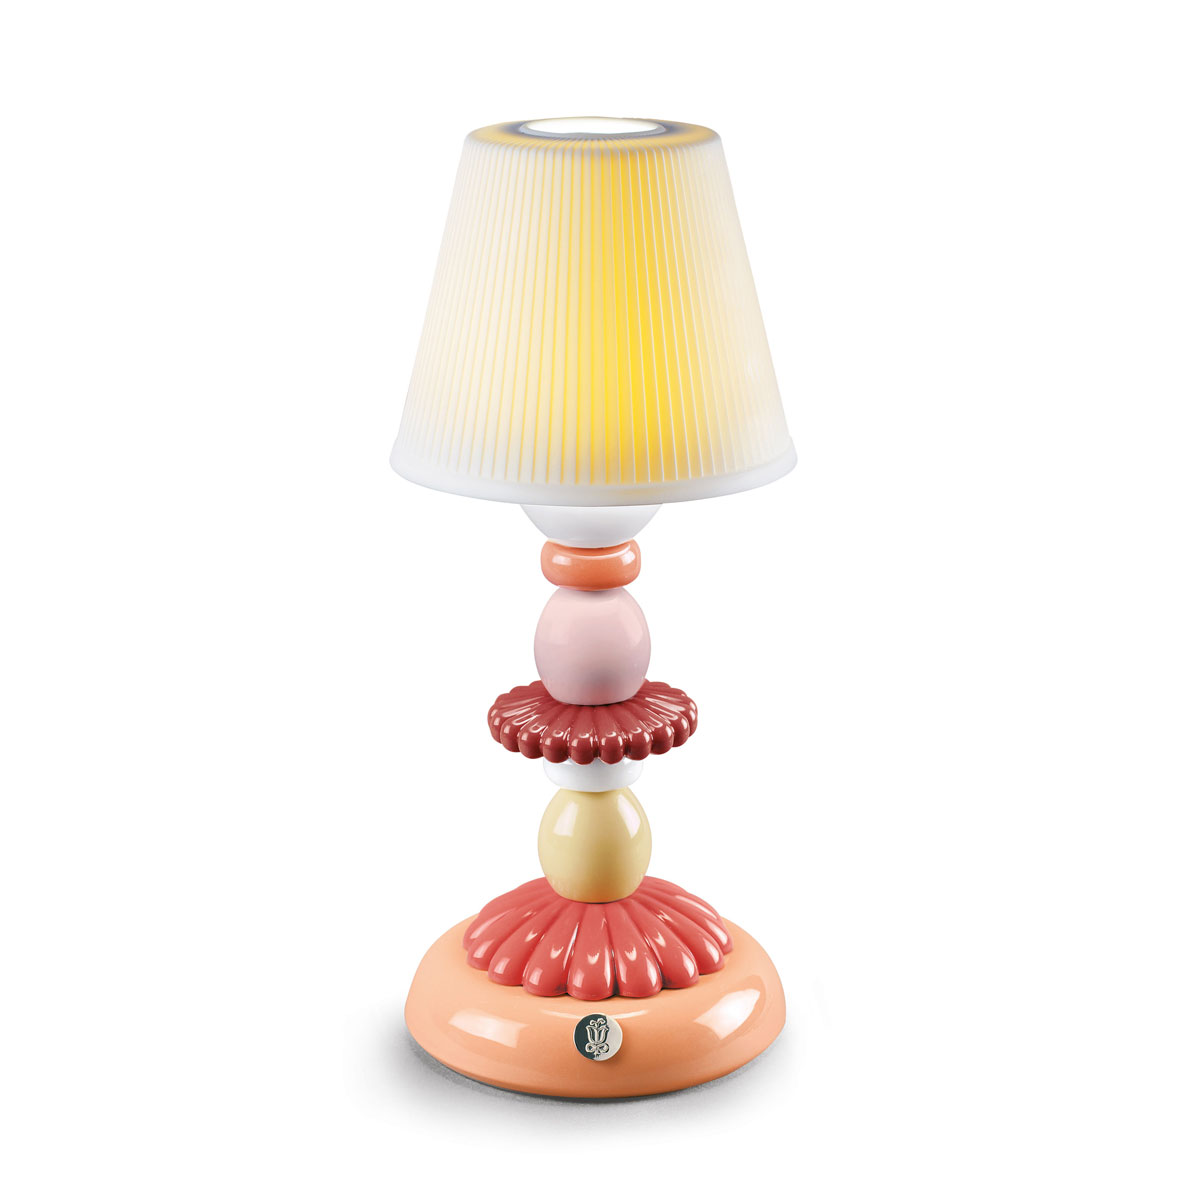 Lladro Light And Fragrance, Lotus Firefly Table Lamp. Coral